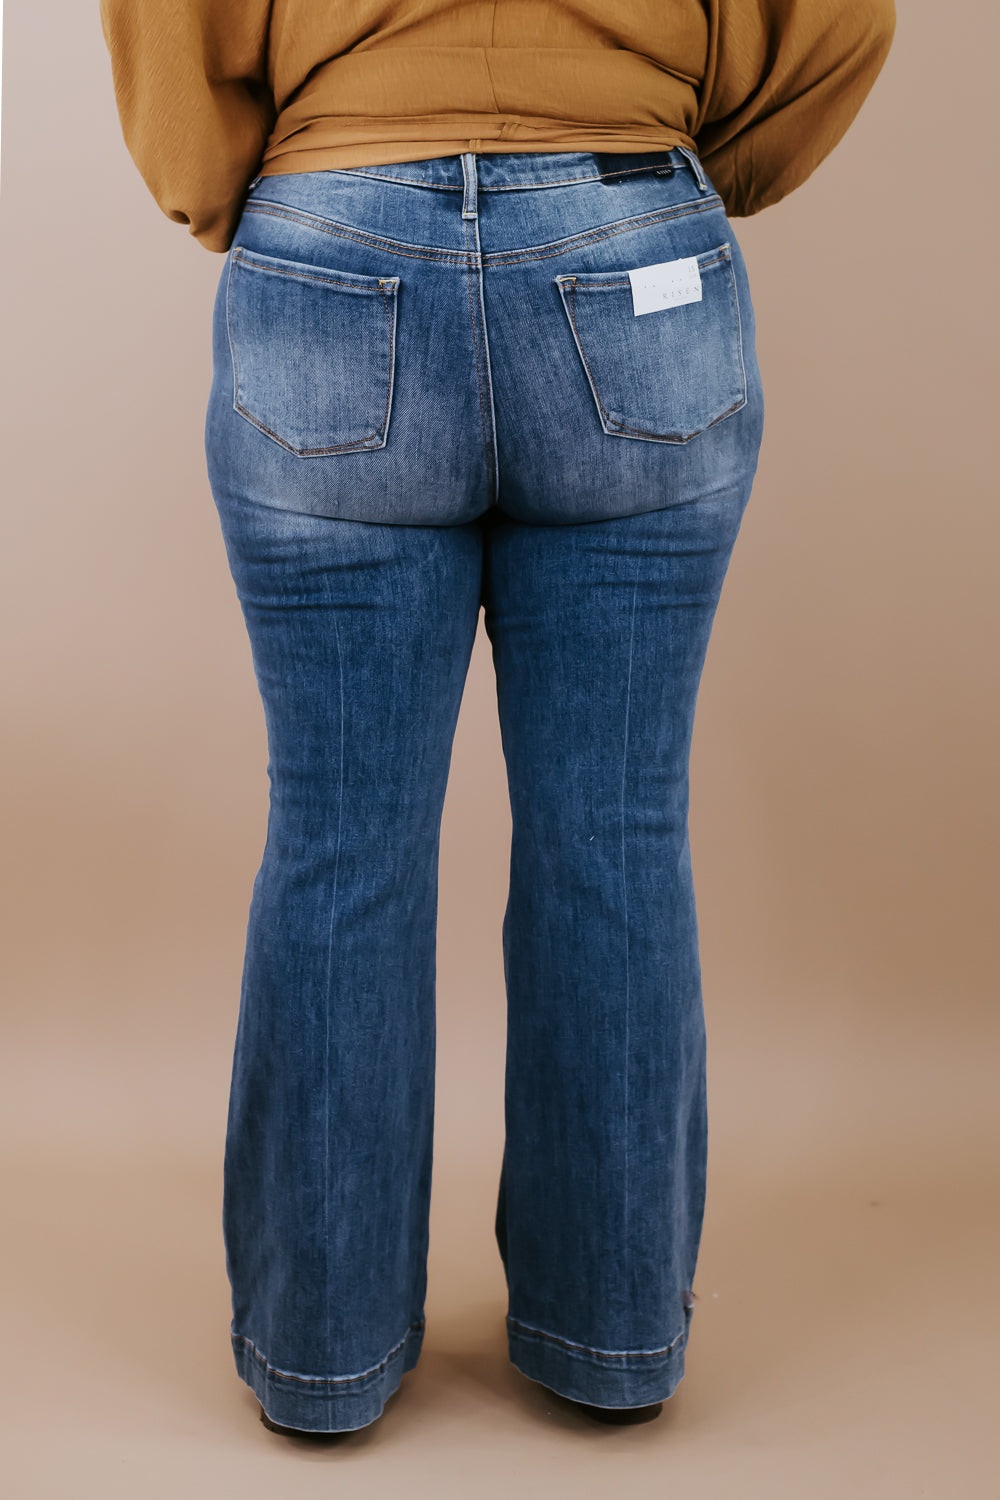 High-rise Bell Bottom Jeans With Heavy Distressing, Unique Boho